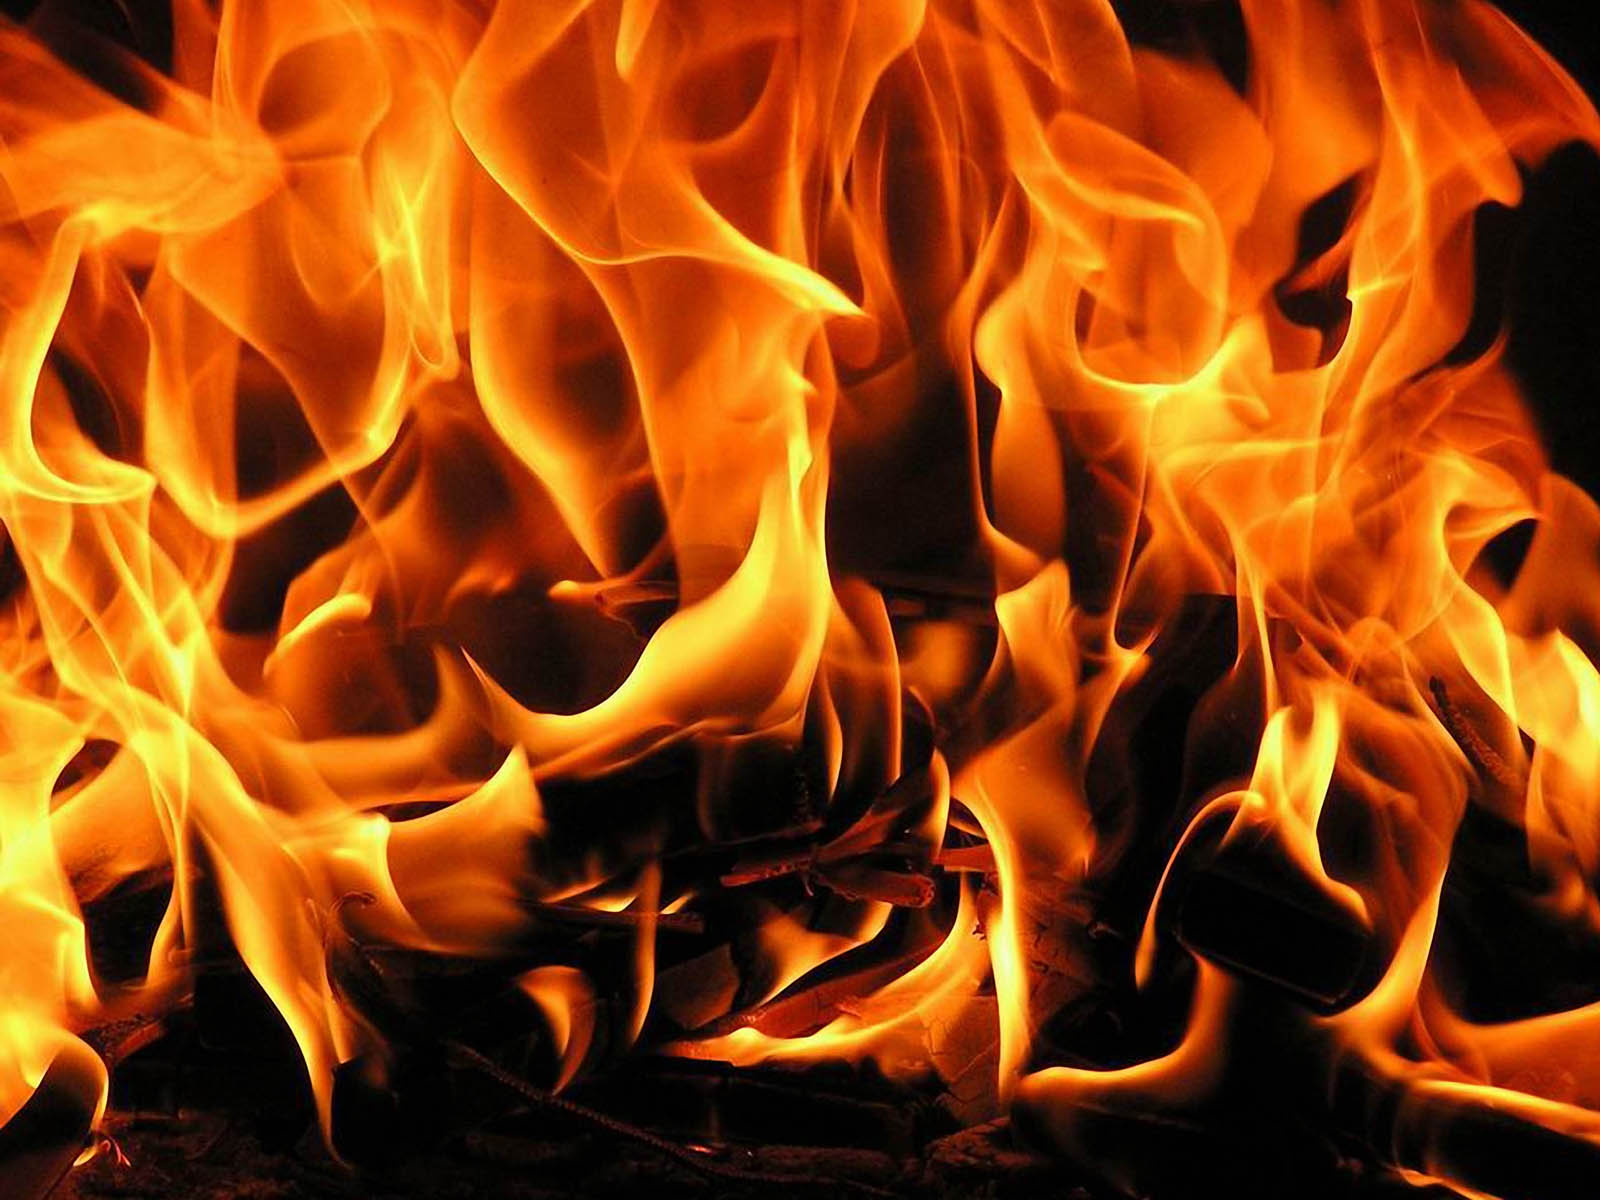 Tag Fire Flames Images Photos Pictures Wallpapers and Backgrounds